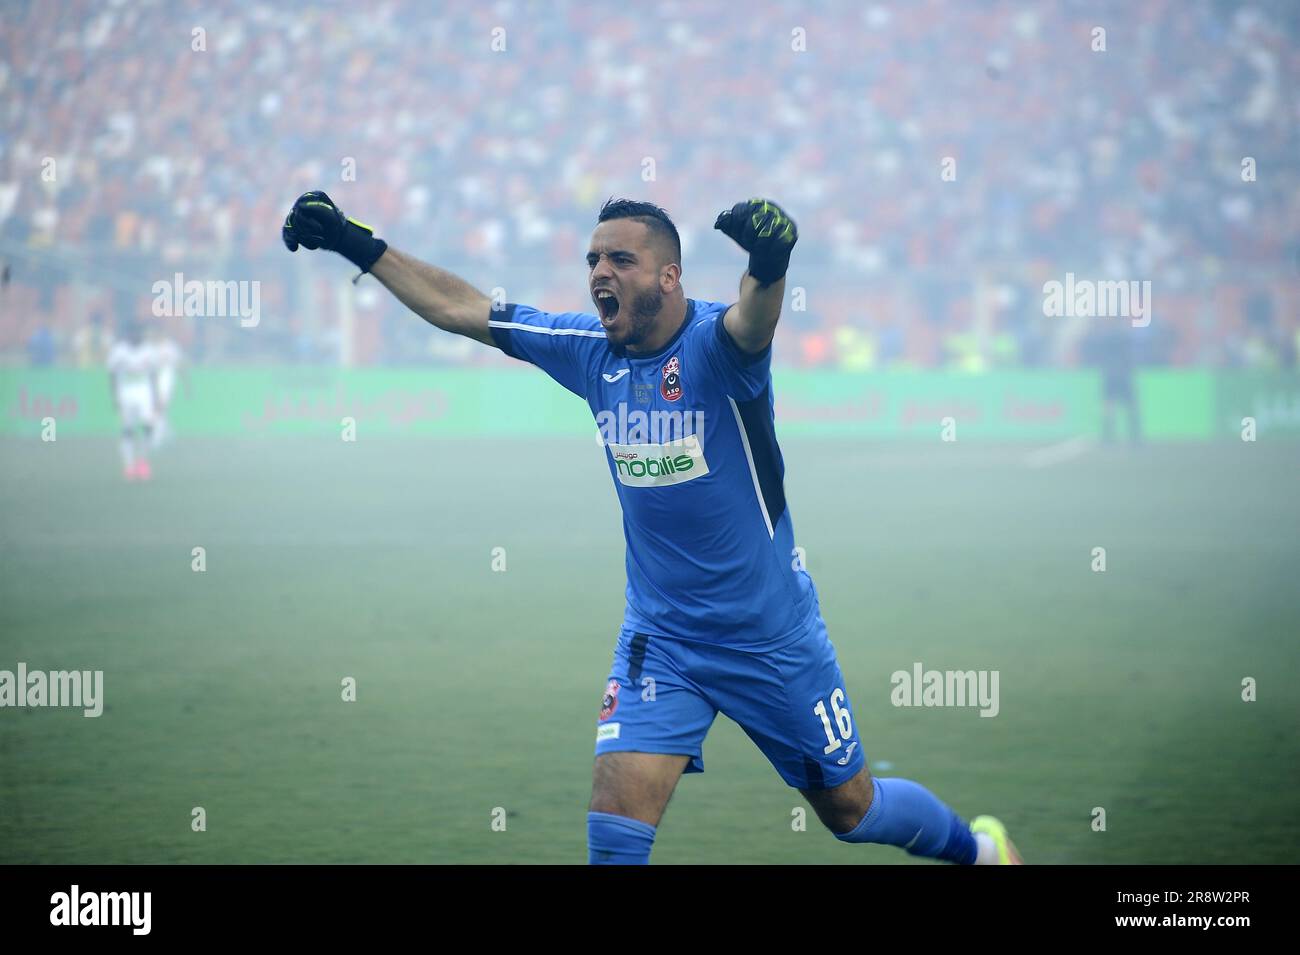 Oran. 23rd June, 2023. ASO Chlef's goalkeeper Mohamed Alaouchiche reacts during the 2023 Algerian Cup final match between ASO Chlef and CR Belouizdad in Oran, Algeria, June 22, 2023. Credit: Xinhua/Alamy Live News Stock Photo